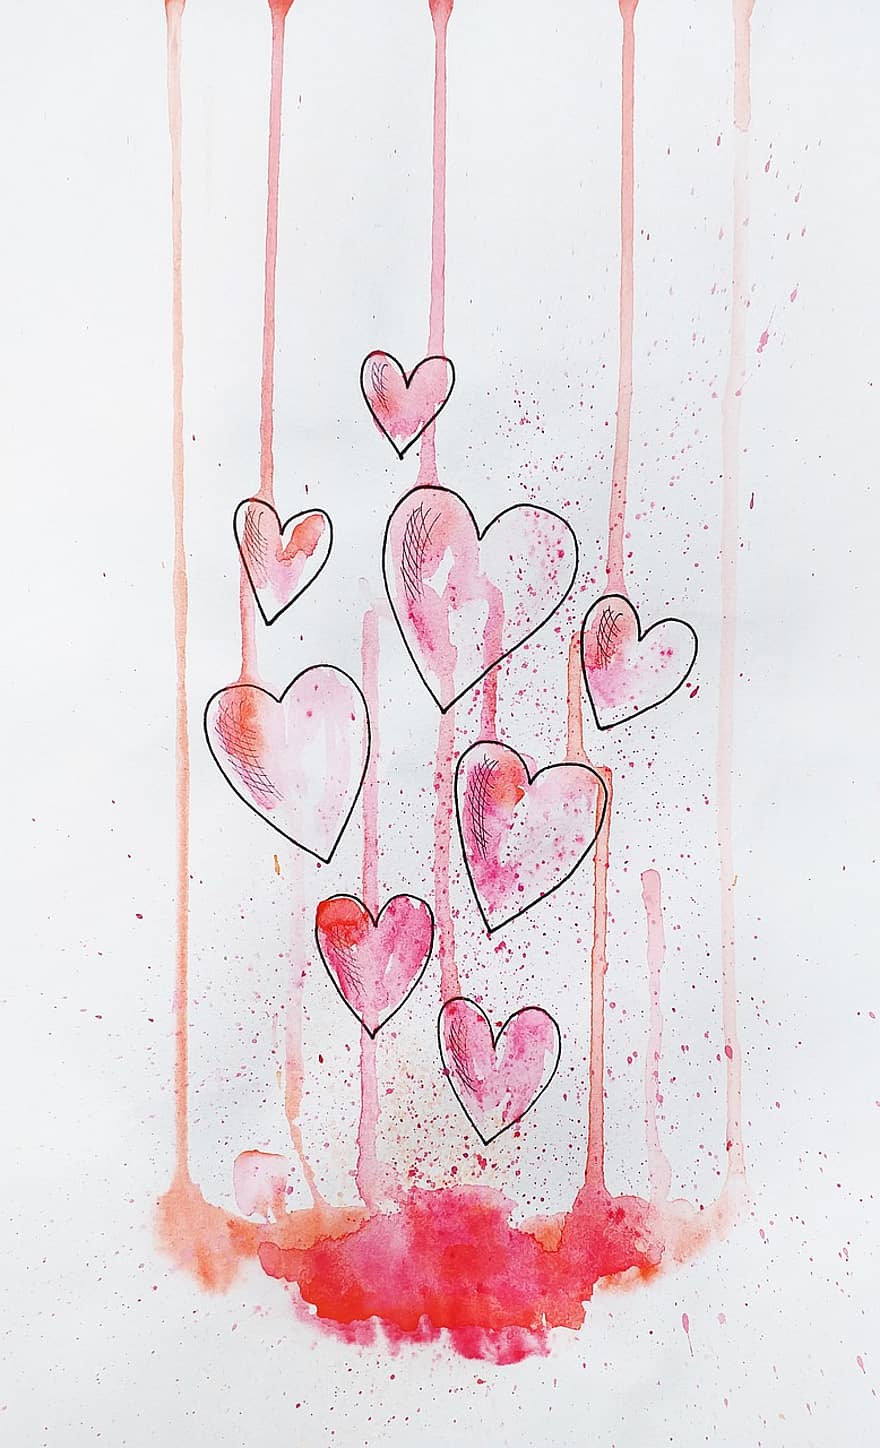 Love, Hearts, Watercolor, Feelings, Valentine's Day, Art, Sketch, Handmade Graphics, Tenderness, A Heart, Relationship